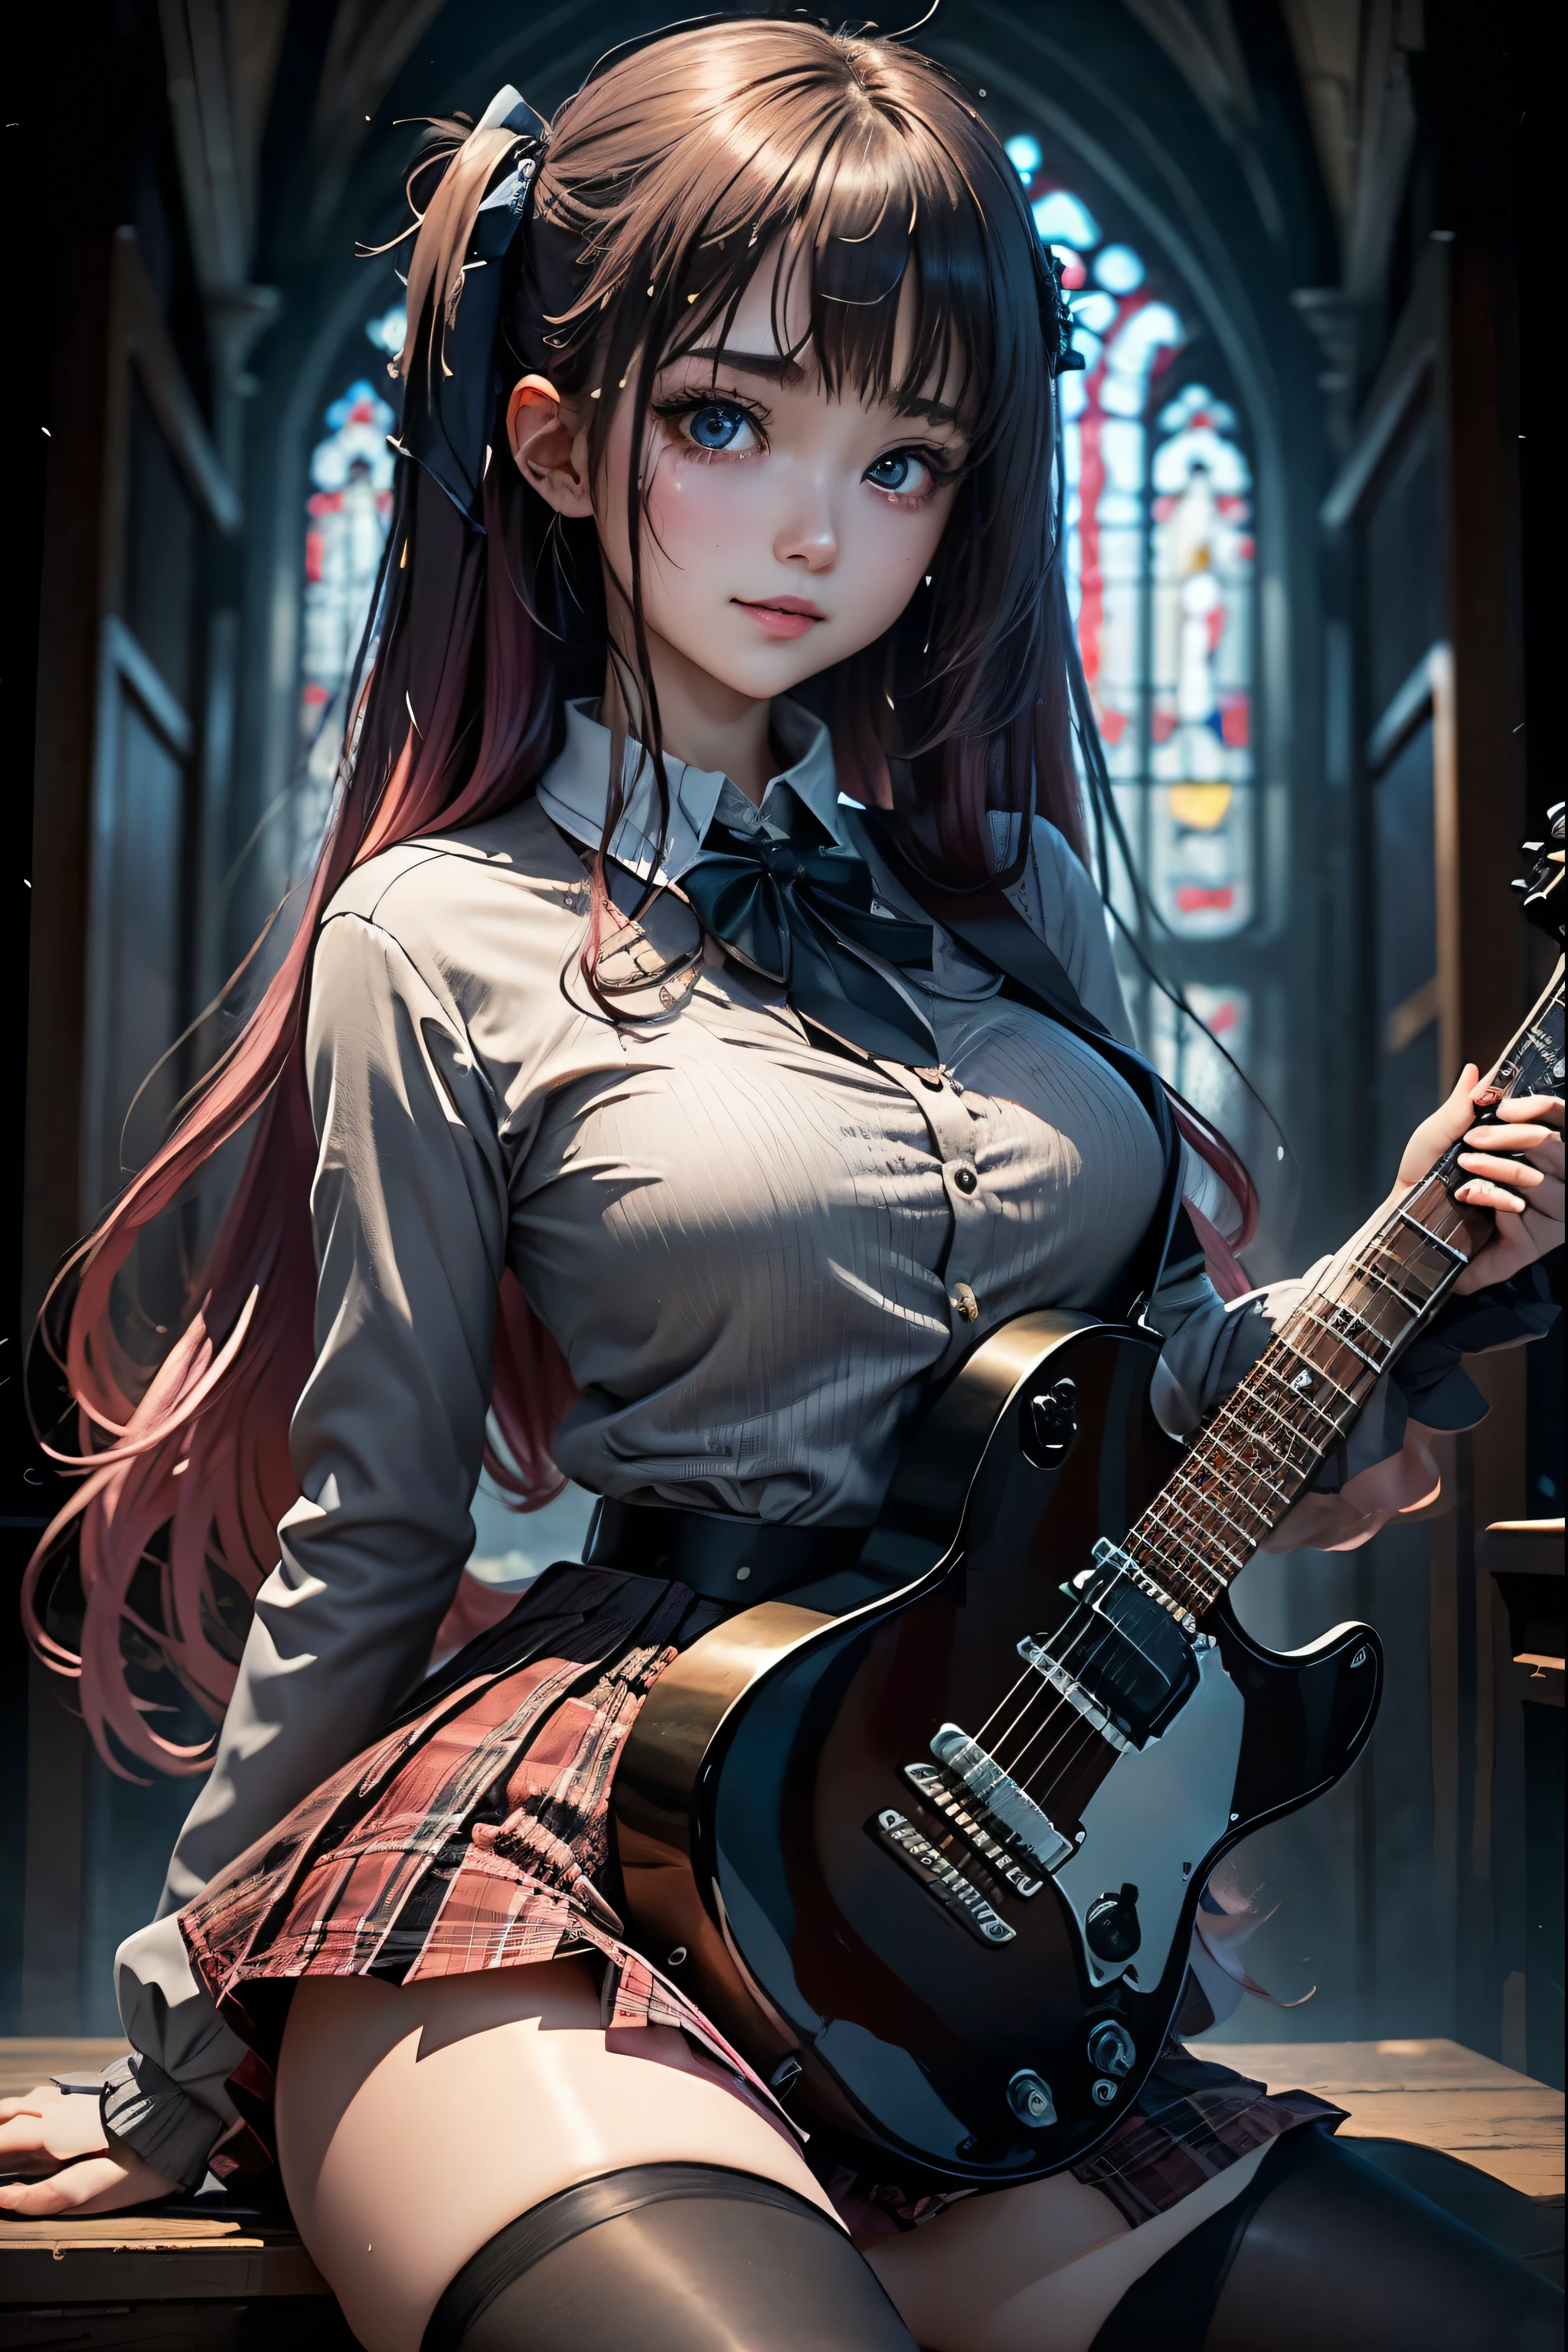 High school girl blazer、 uniform、Red checked skirt、JK Style、Jacket、smile、Knee-high socks、Thigh-high socks、pantyhose、A superb beauty、Super cute、Playing guitar、Have a guiate、Shout and sing loudly、stand、play the guitar、ennui、Rare beauty、Twin tail hair、Black Dark Eyeshadow、Sad、Good skin glow、Long hair straightener、Dark Gothic Makeup、Dark Smile、Fragrant beauty、Stained glass background、Mastepiece、Best Quality、Refers to 5 books、Sweat glistening on my chest、Sweat glistening on my face、Small breast size、Dark pink hair、Age 22 years old、Slightly slim、Mysterious look、A sad expression、Pink Hair、mysterious gothic church、enchanting castle、Sweating profusely all over the body、A lot of sweat and light on the thighs、Shiny thighs、Plenty of sweat glistening on the thighs、A large amount of sweat glistens on my thighs、Sweating profusely、Gal、Small breasts、japanese face、Alluring expression、Thighs are a little slender、Skirt length above the knee、Wear a black bikini underneath、Guitar live performance、Band Scene、